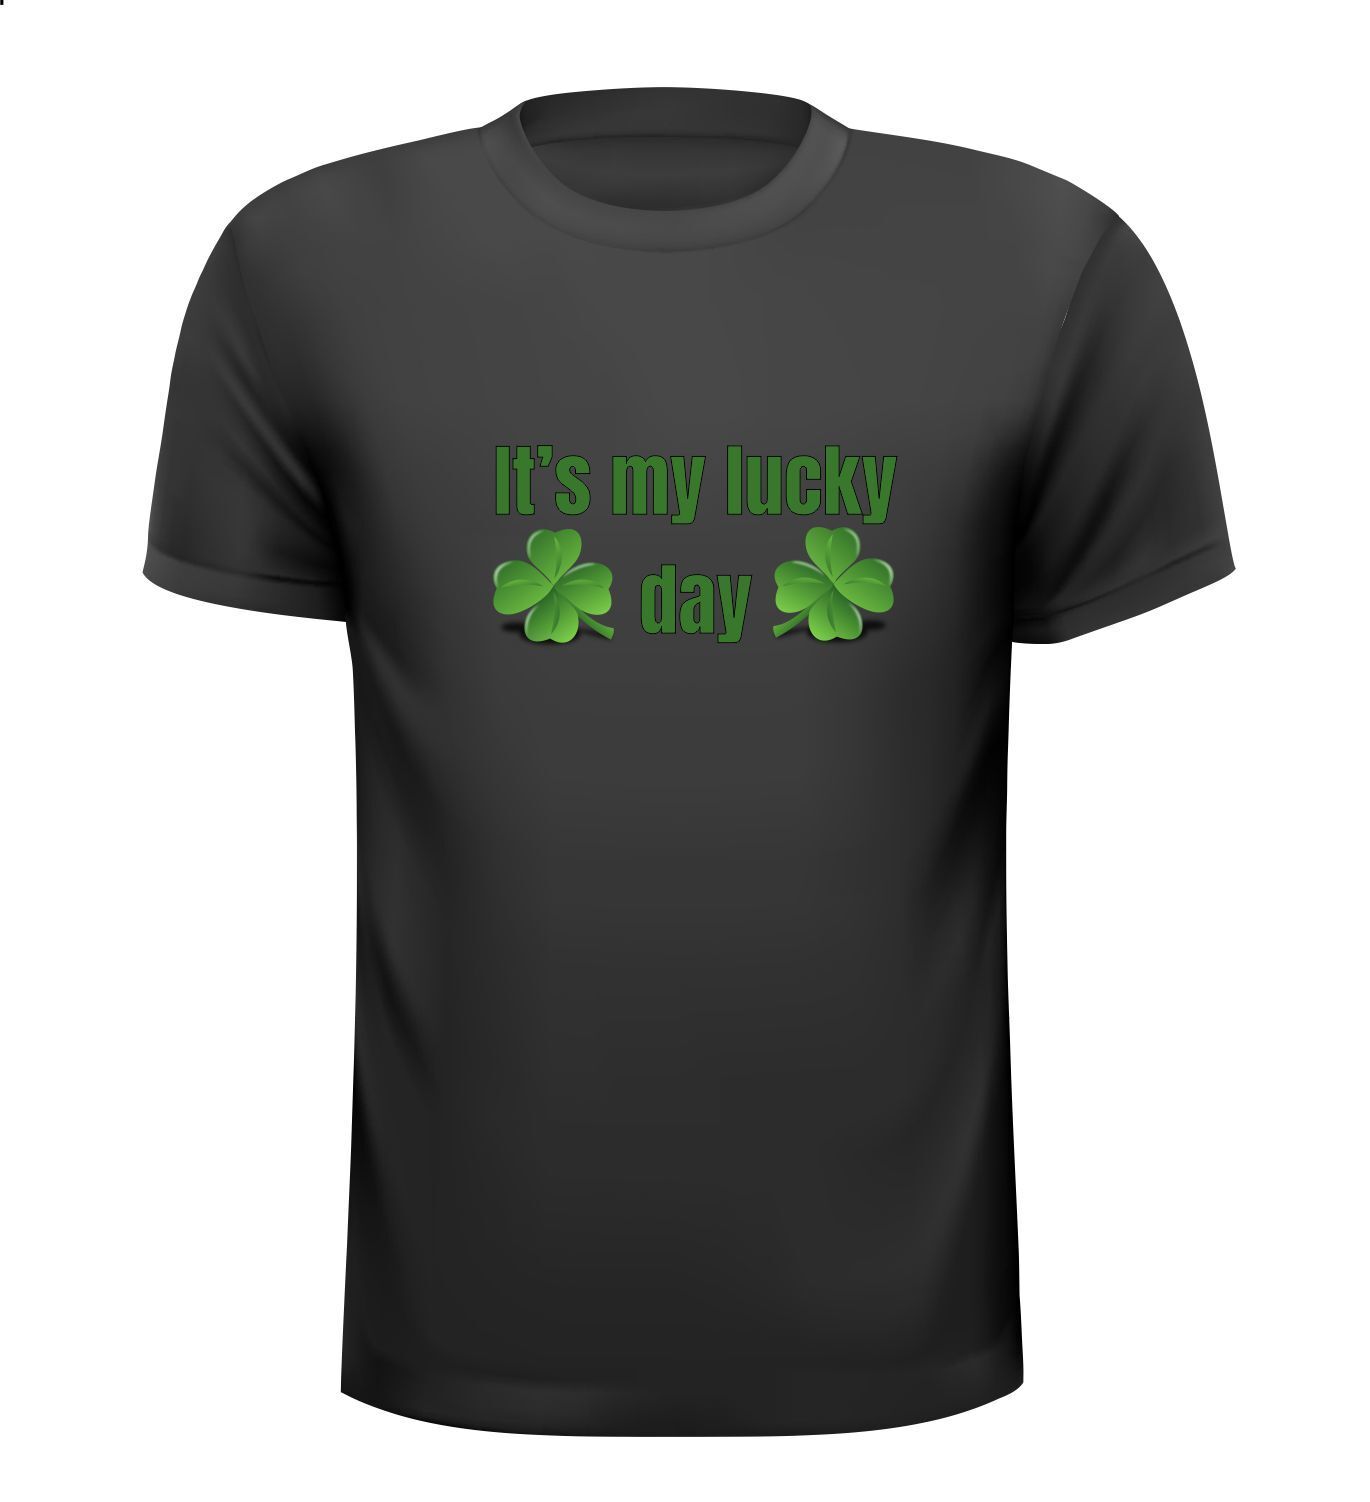 It's my lucky day T-shirt